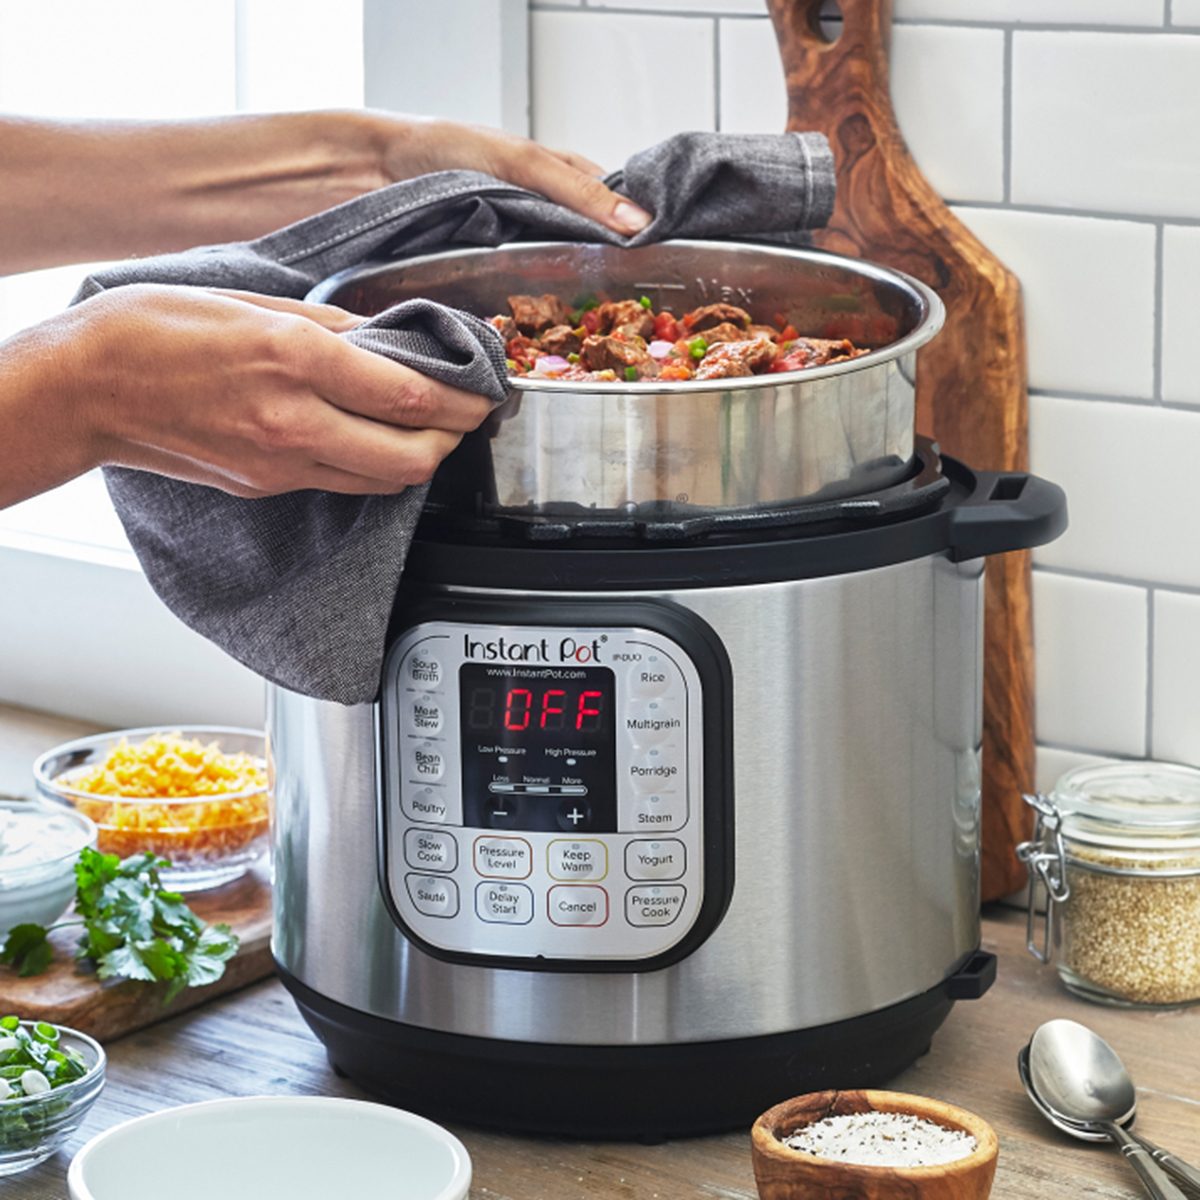 Is Instant Pot the best? America's Test Kitchen reviews multicookers